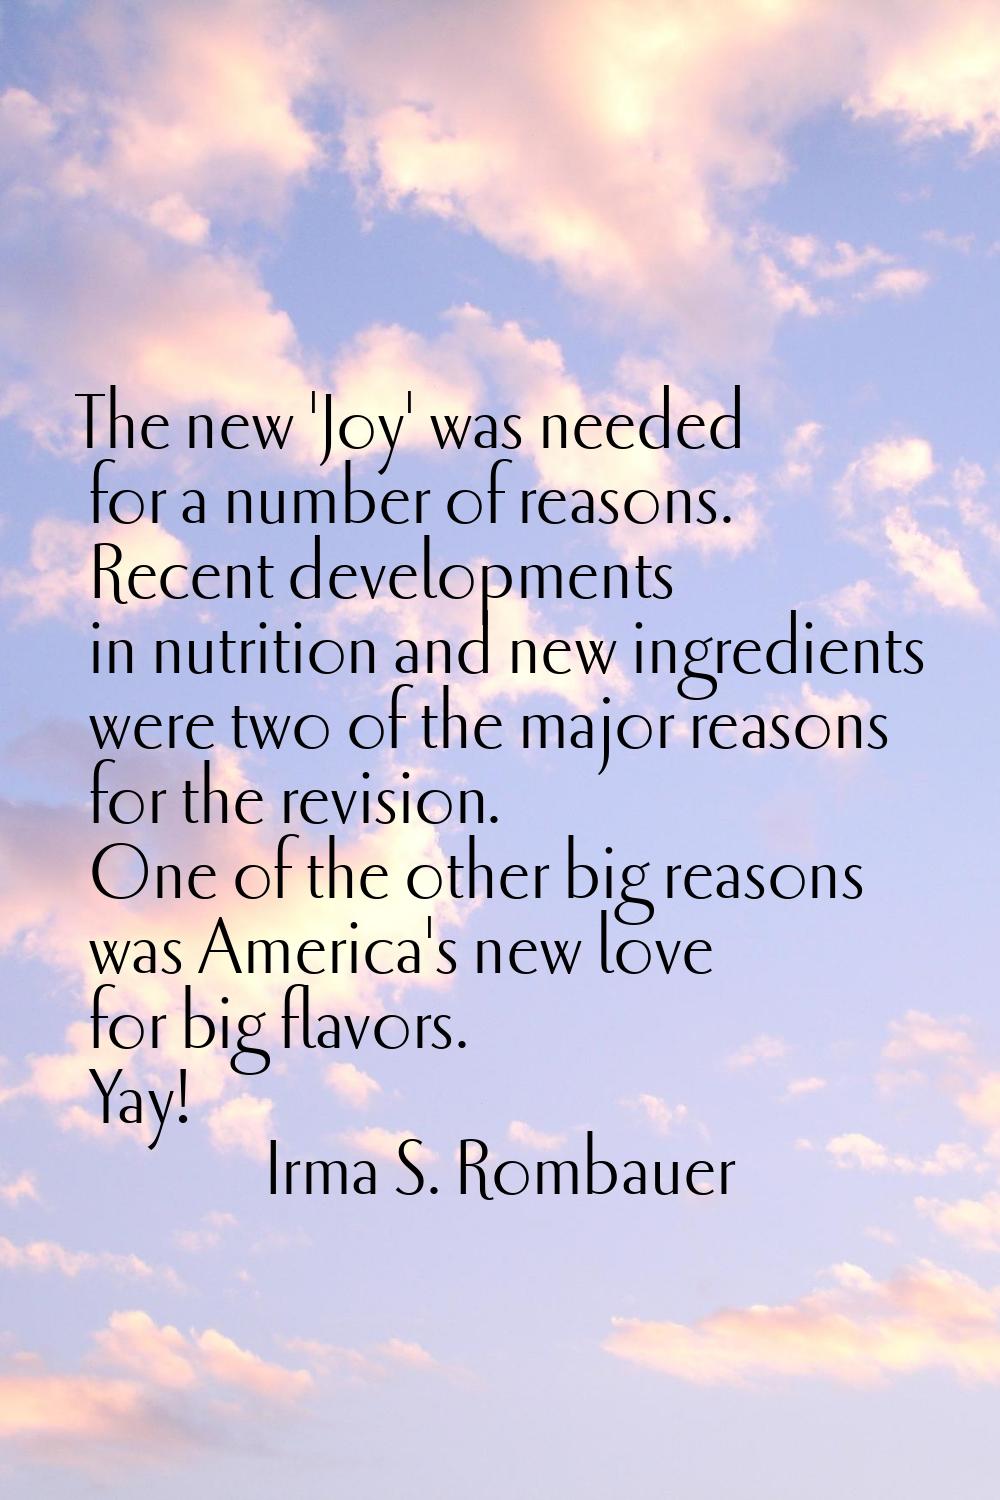 The new 'Joy' was needed for a number of reasons. Recent developments in nutrition and new ingredie